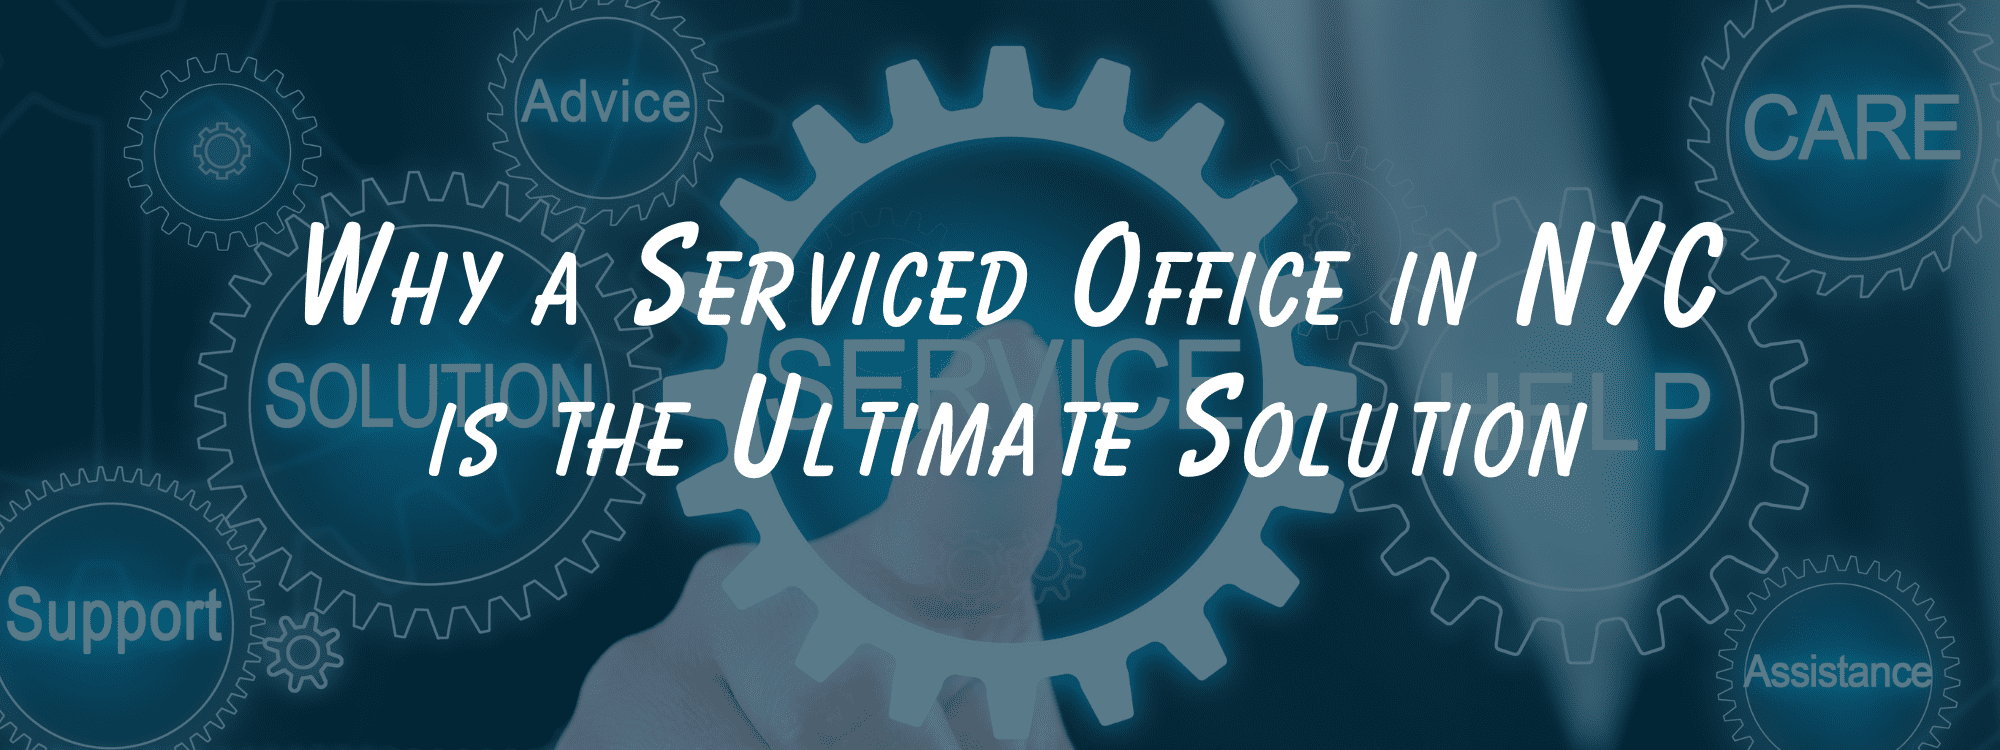 Why a serviced office in NYC is the perfect solution